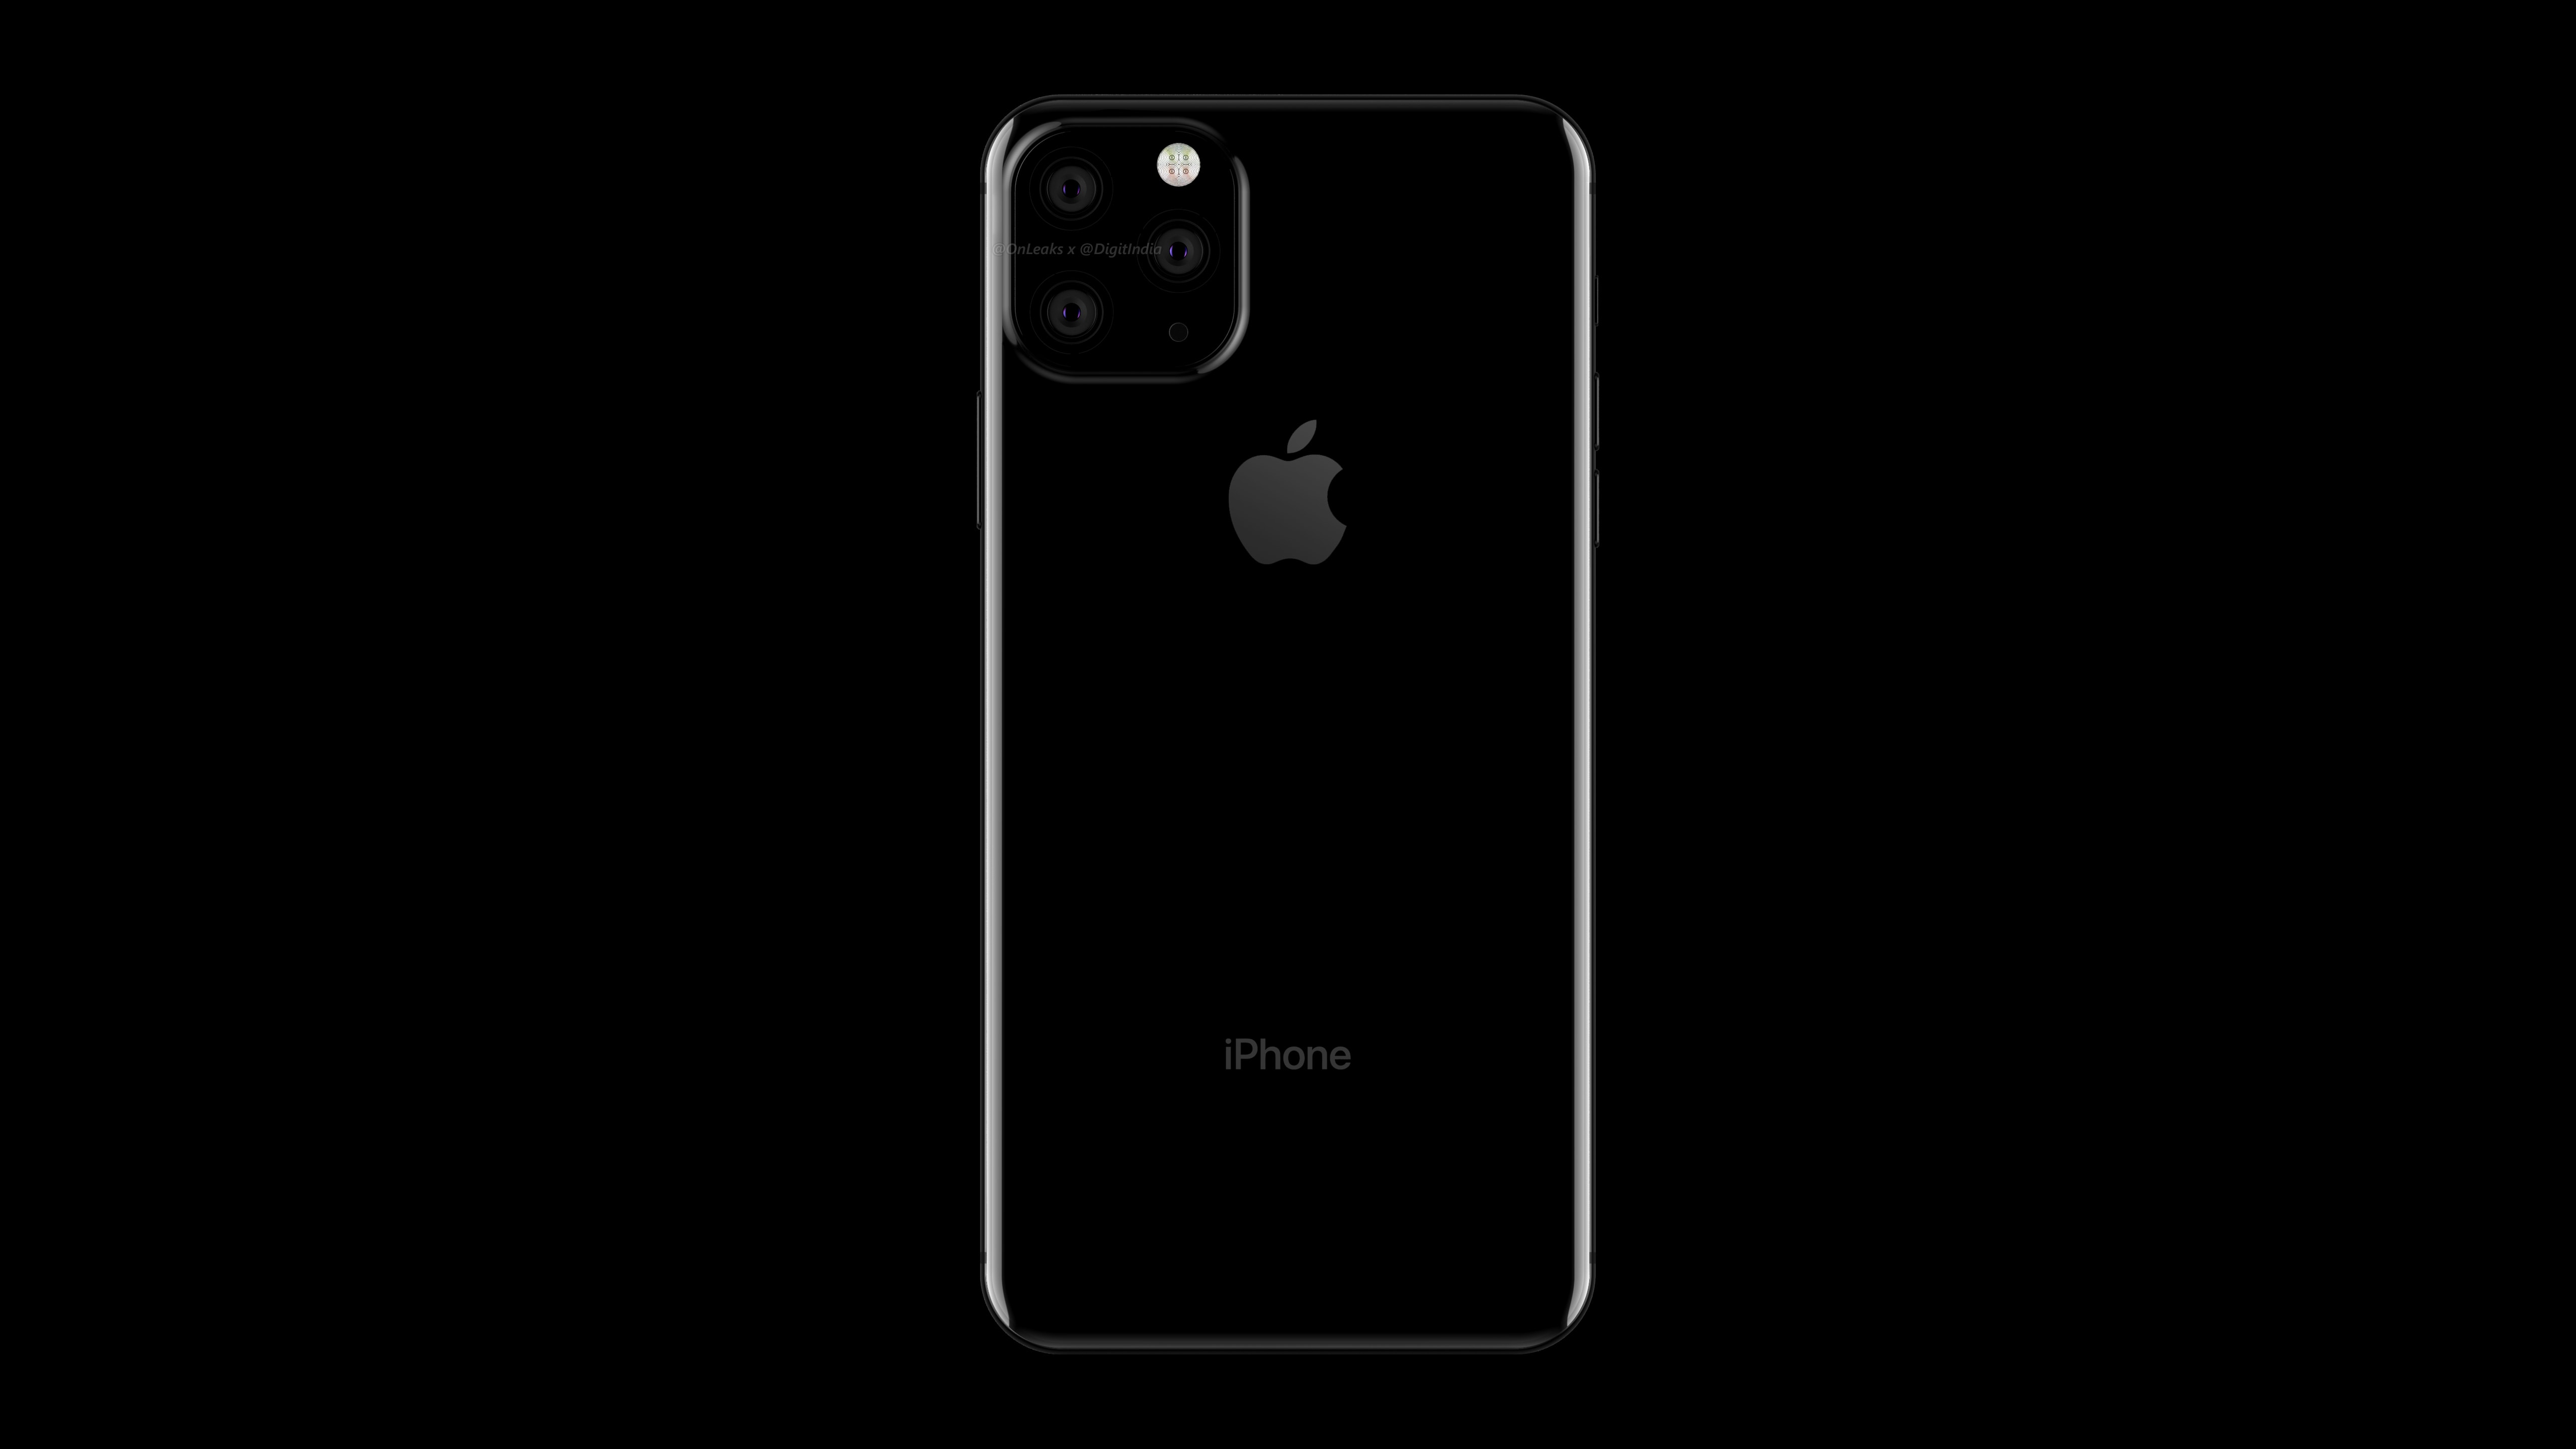 A leaked render shows the trio of camera leases that might be a highlight of the 2019 iPhone.